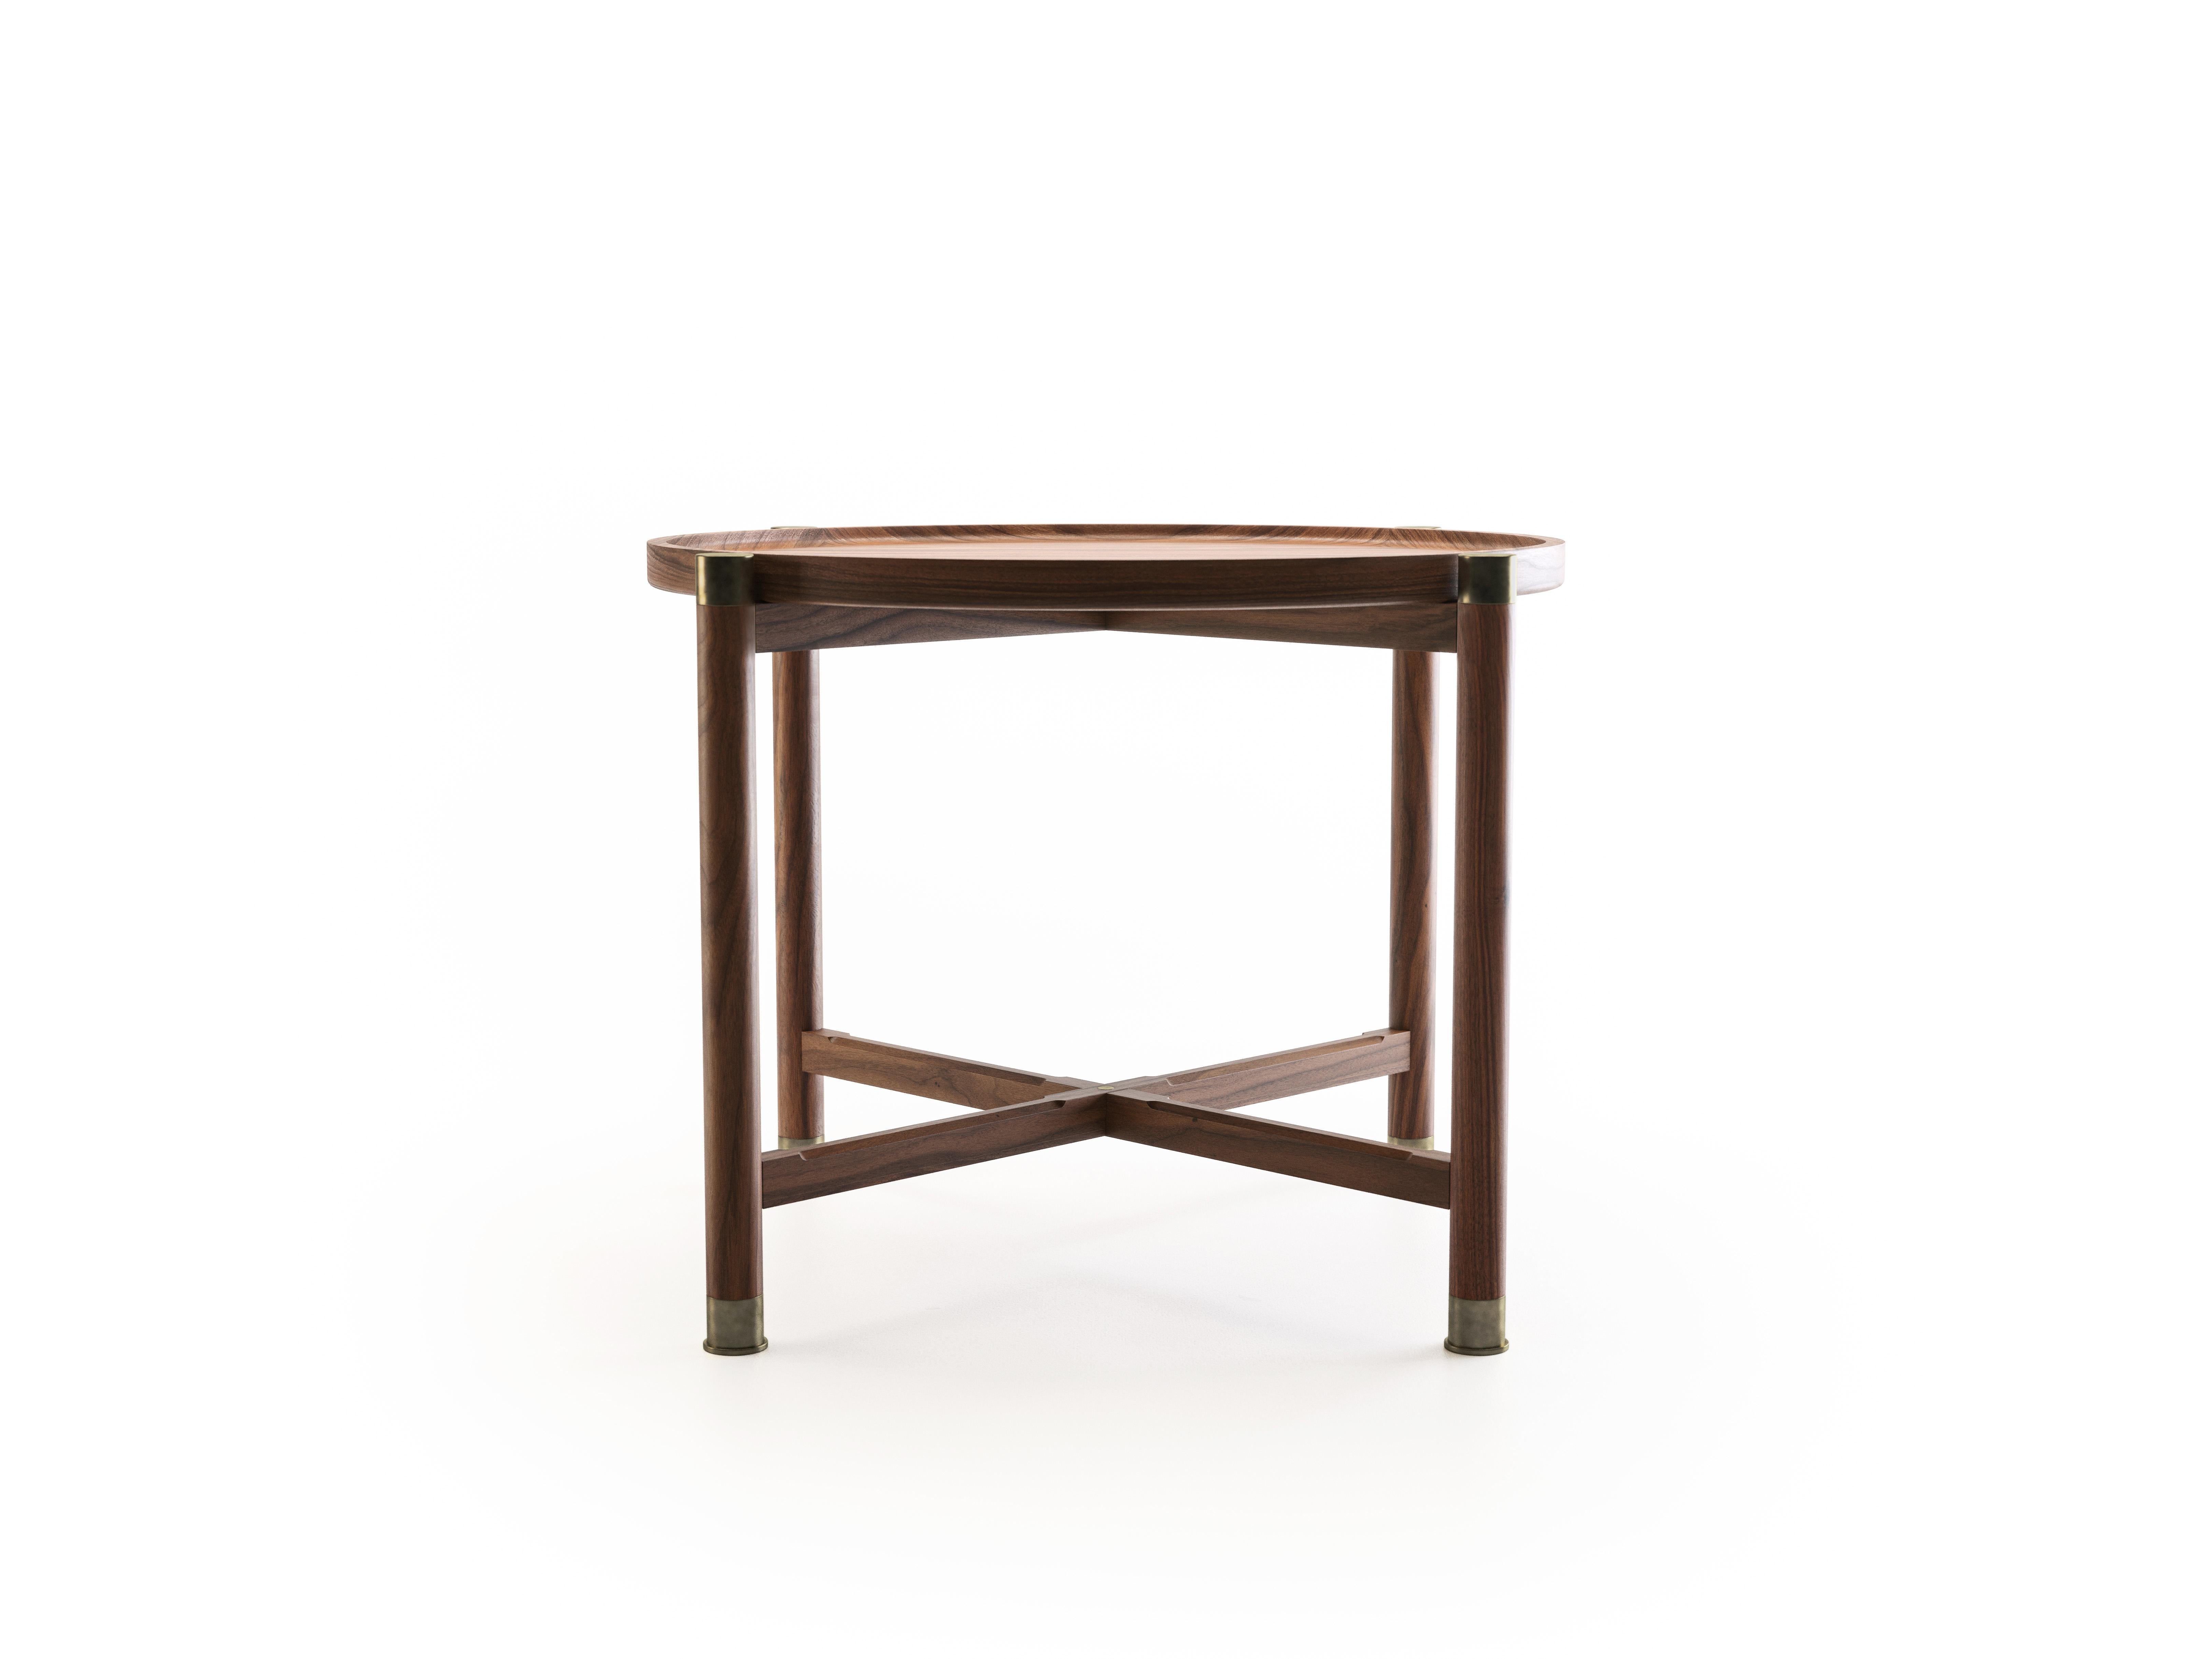 The Otto side table is a generously proportioned table with a simple, well-articulated form.
Available in walnut or oak, it features a round coupe top, substantial antique brass fittings, and sleek chamfered stretchers. The epitome of understated